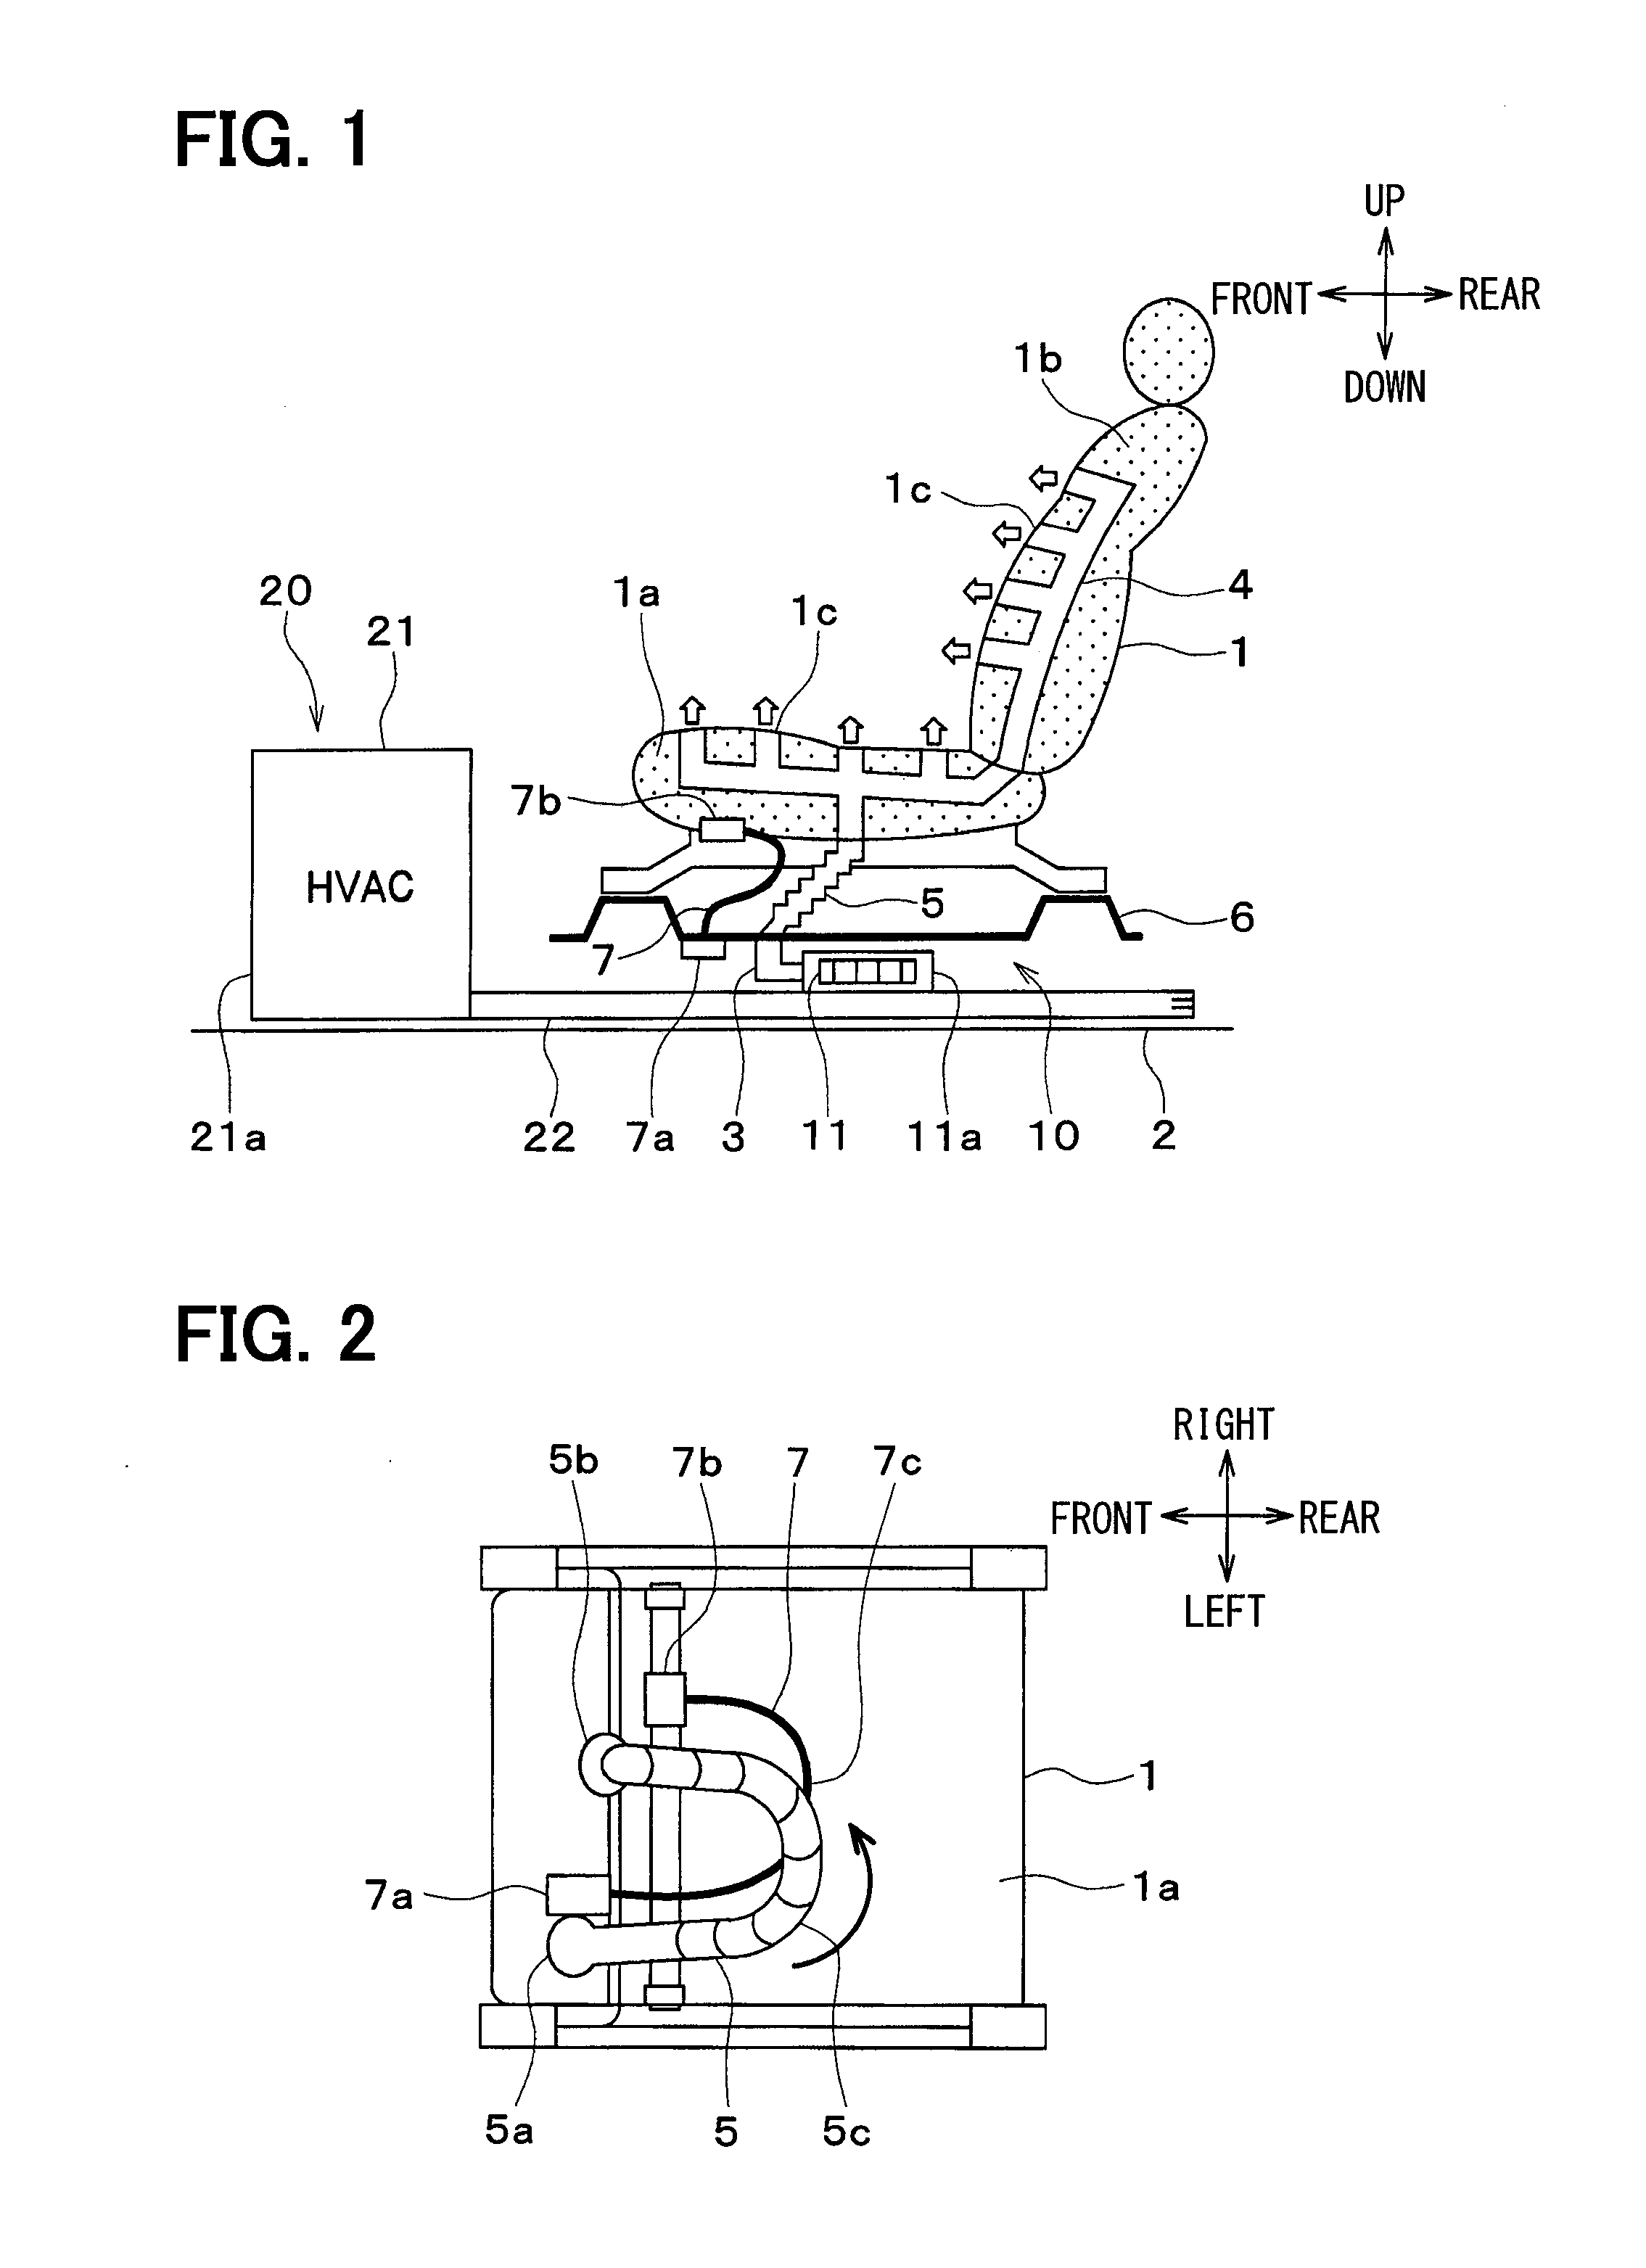 Seat air conditioning device for vehicle